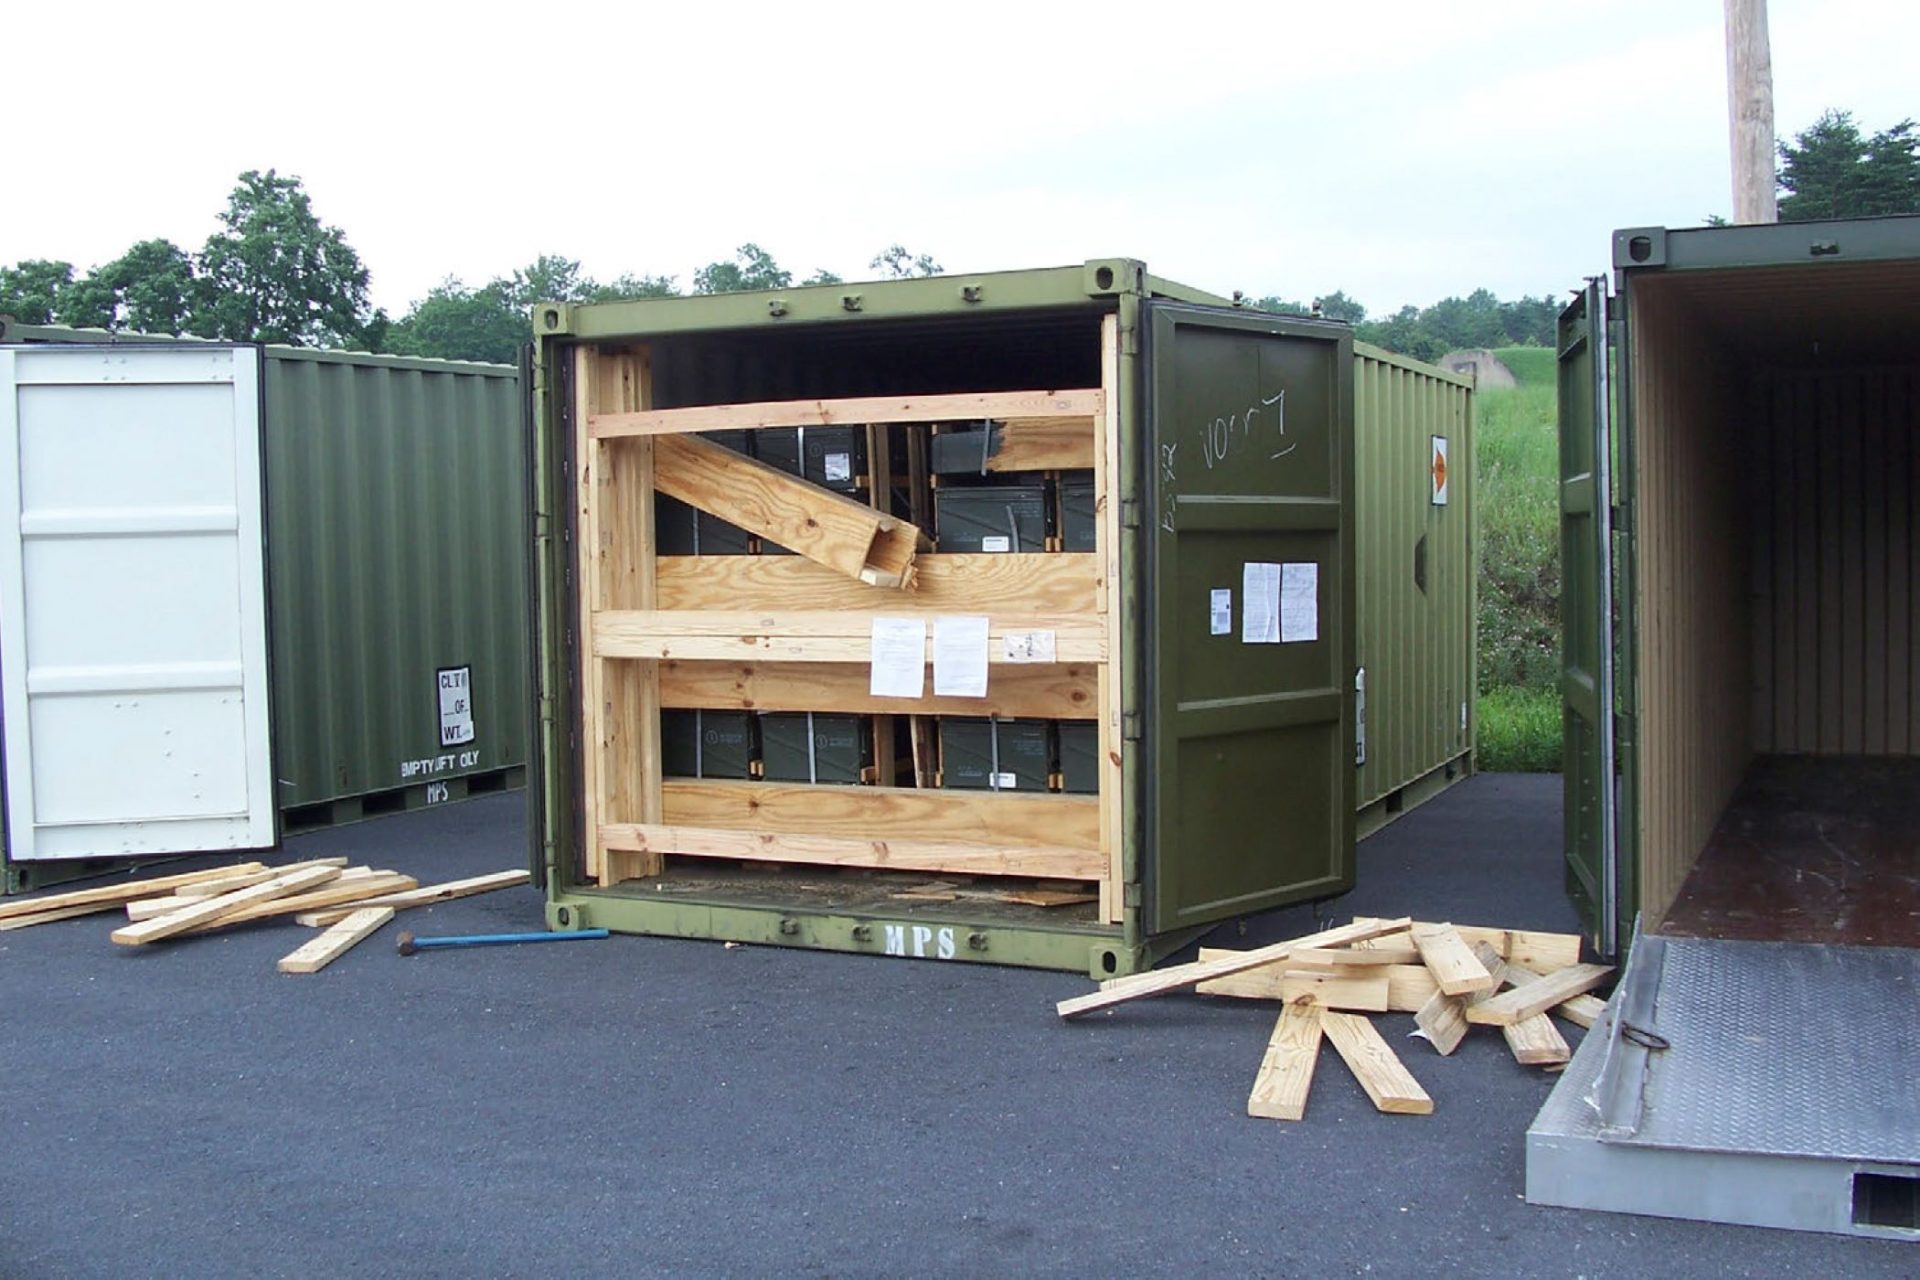 In this July 13, 2017, image provided by the U.S. Army Criminal Investigation Command on Feb. 9, 2021, a storage container of explosive ordnance shows signs of theft after arriving at the Letterkenny Army Depot in Chambersburg, Pa. An ammunition canister containing 32 rounds of 40mm M430A1 grenades, property of the U.S. Marine Corps, was missing.